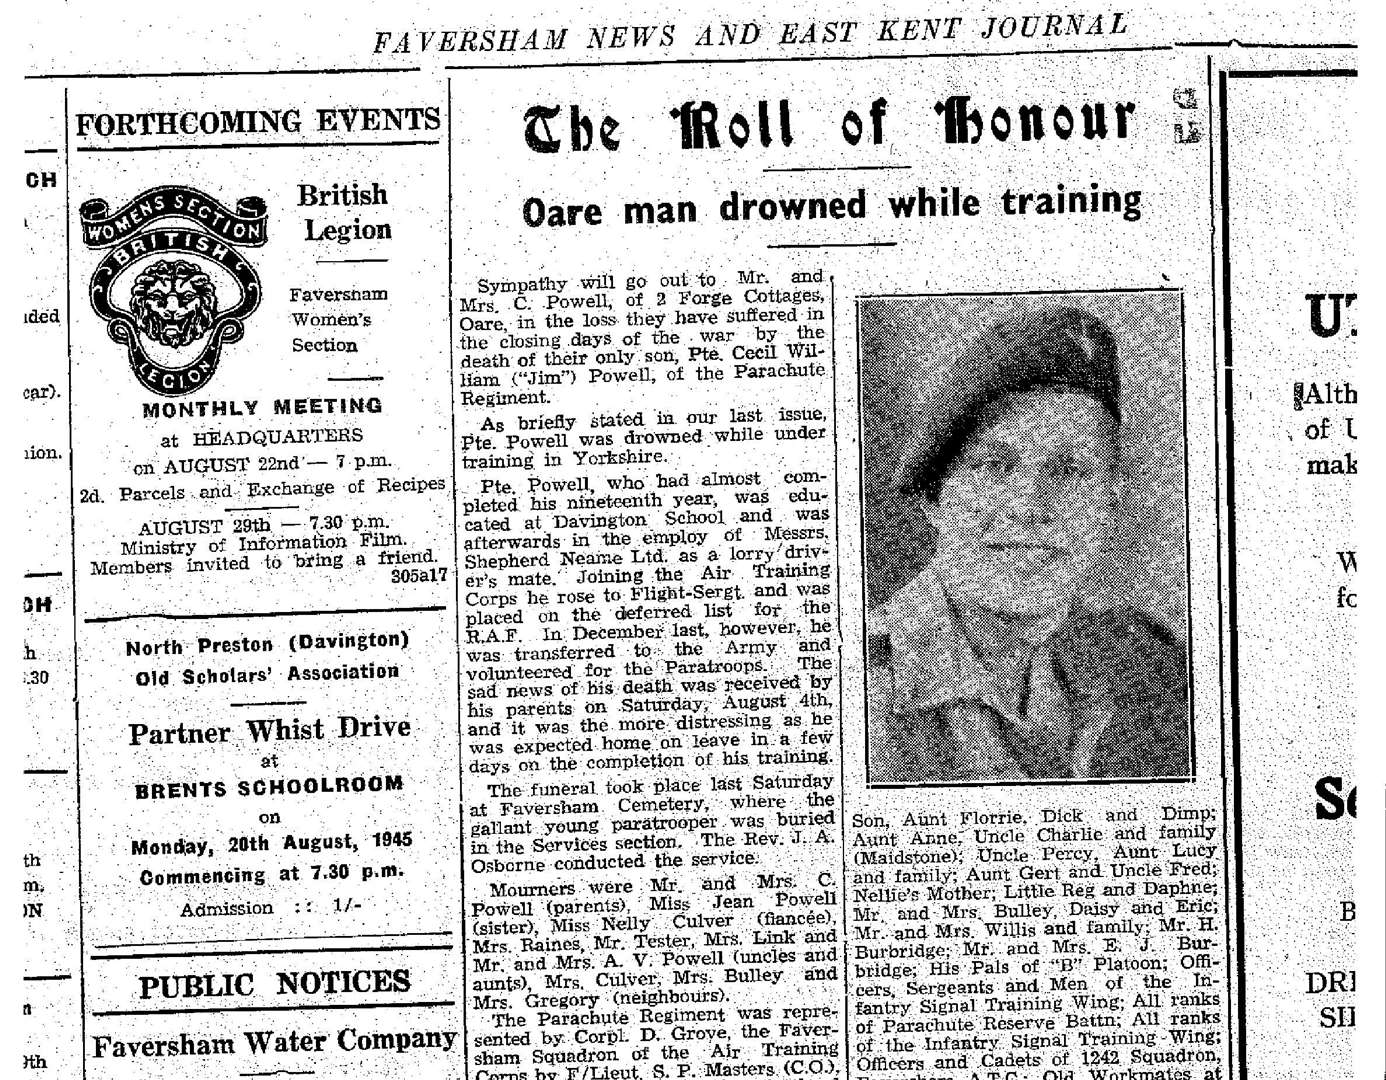 The News reported the death of Private Jim Powell - the last Faversham fatality of the Second World War